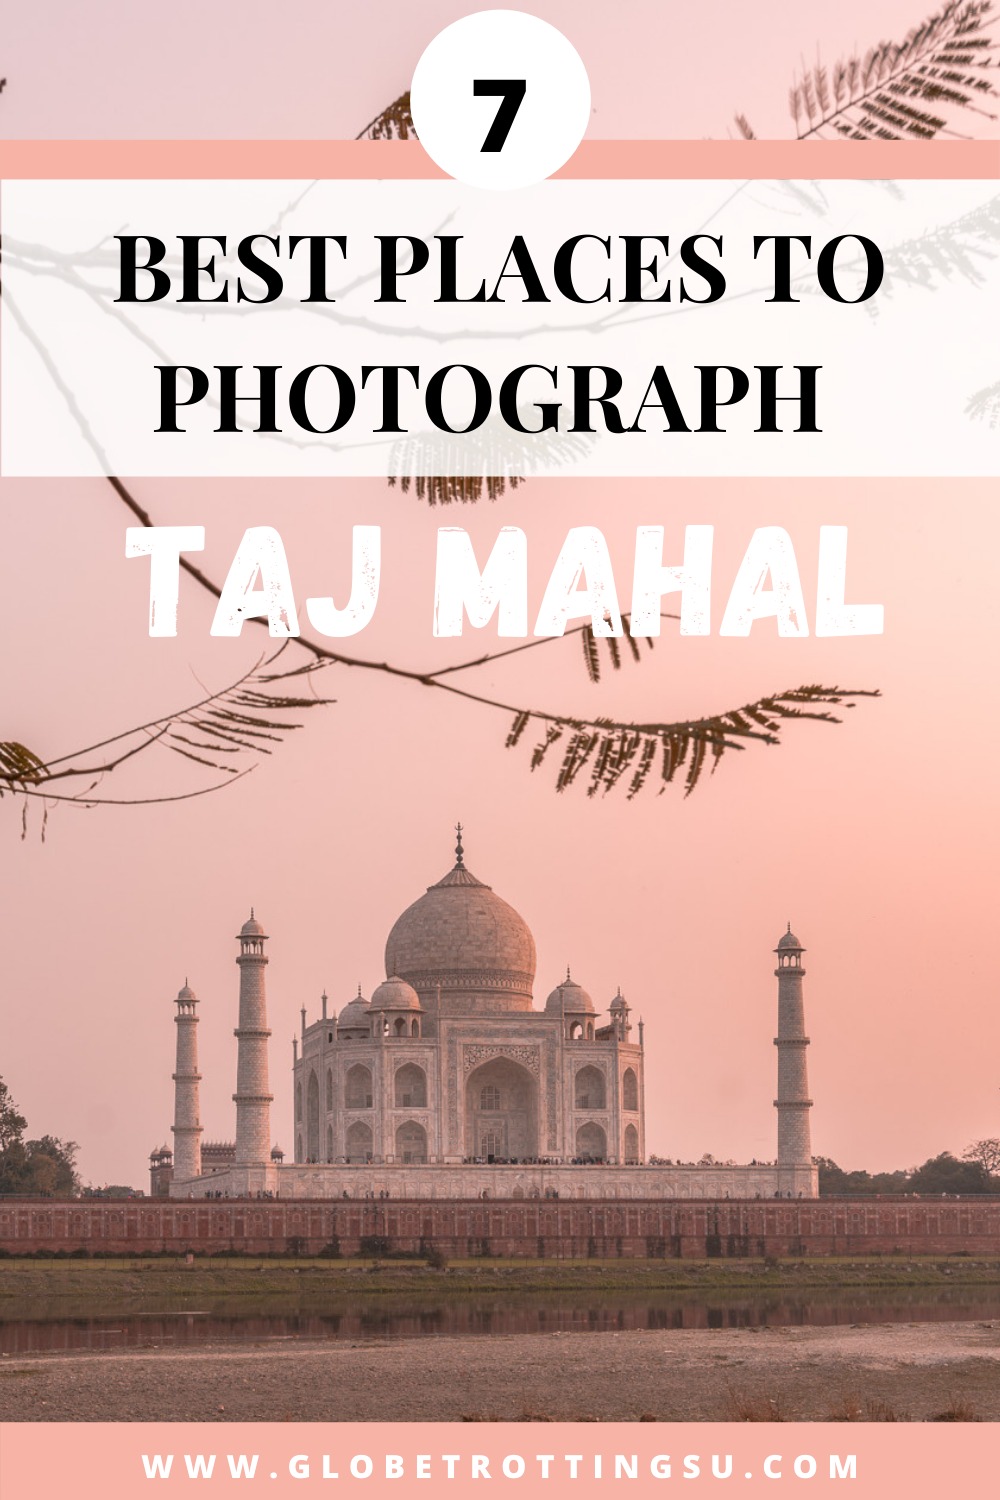 The best Taj Mahal Travel & Photography Guide to find all the amazing places to shoot and capture the iconic World Wonder. Find in-depth details on best time to shoot and capture Taj Mahal from different places around Agra, India.